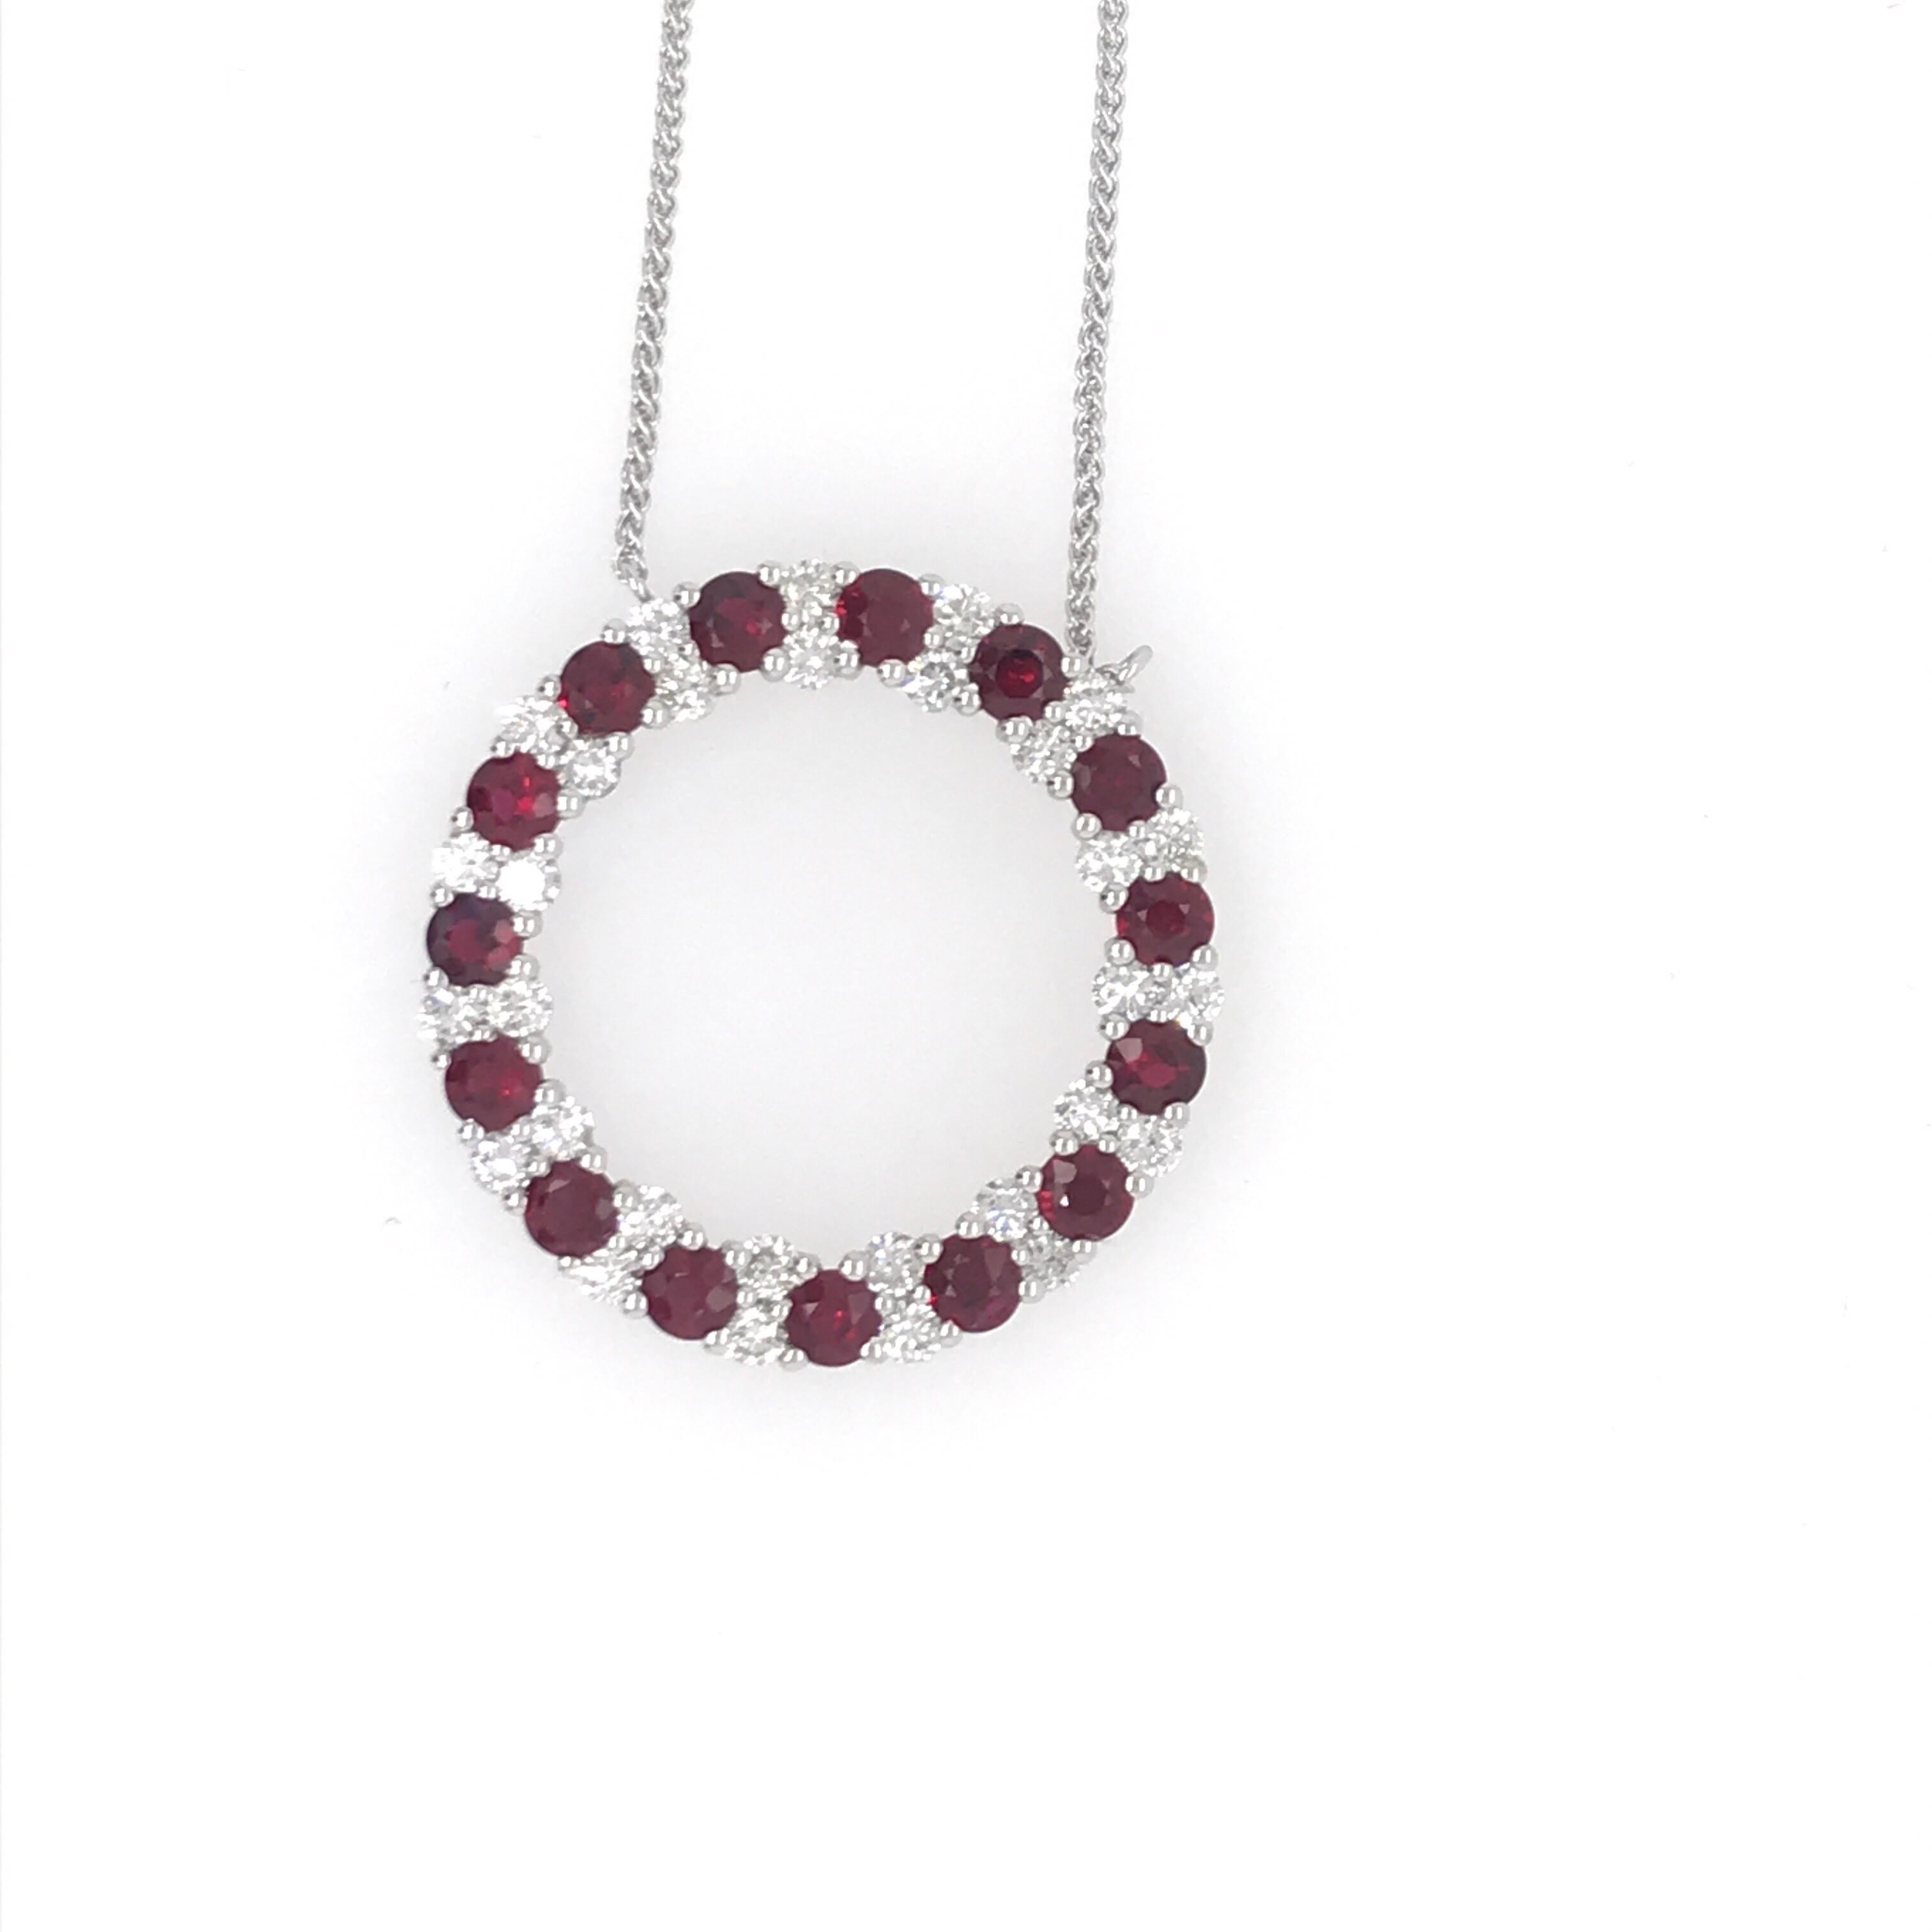 18K White gold circle pendant necklace featuring 15 red rubies weighing 2.58 carats and 30 round brilliants weighing 1.31 carats.
Color G-H
Clarity SI